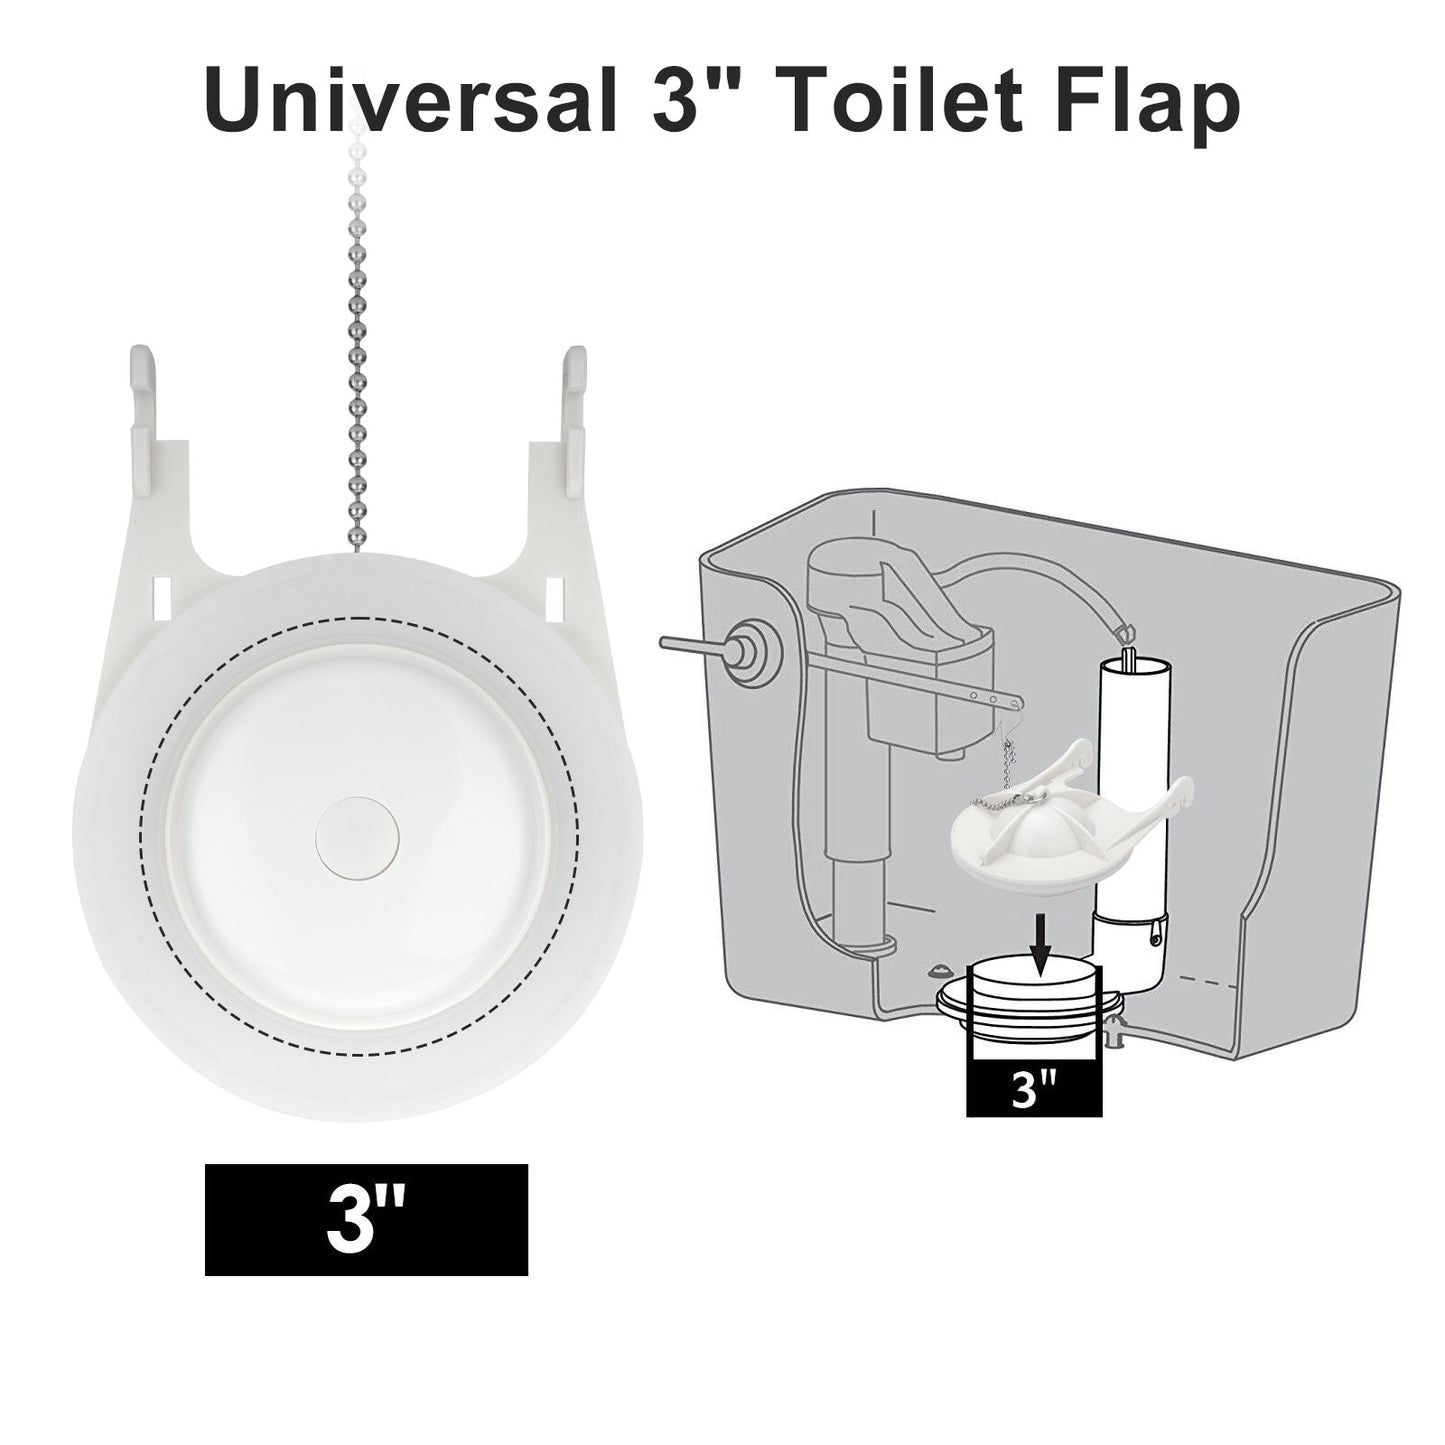 2Pcs 3 inch Toilet Tank Flapper - Toilet Wrench Toilet Tank Hinge Flapper Repair Part,Compatible with American Standard 38920-0070A 3 Inch Flapper (White)